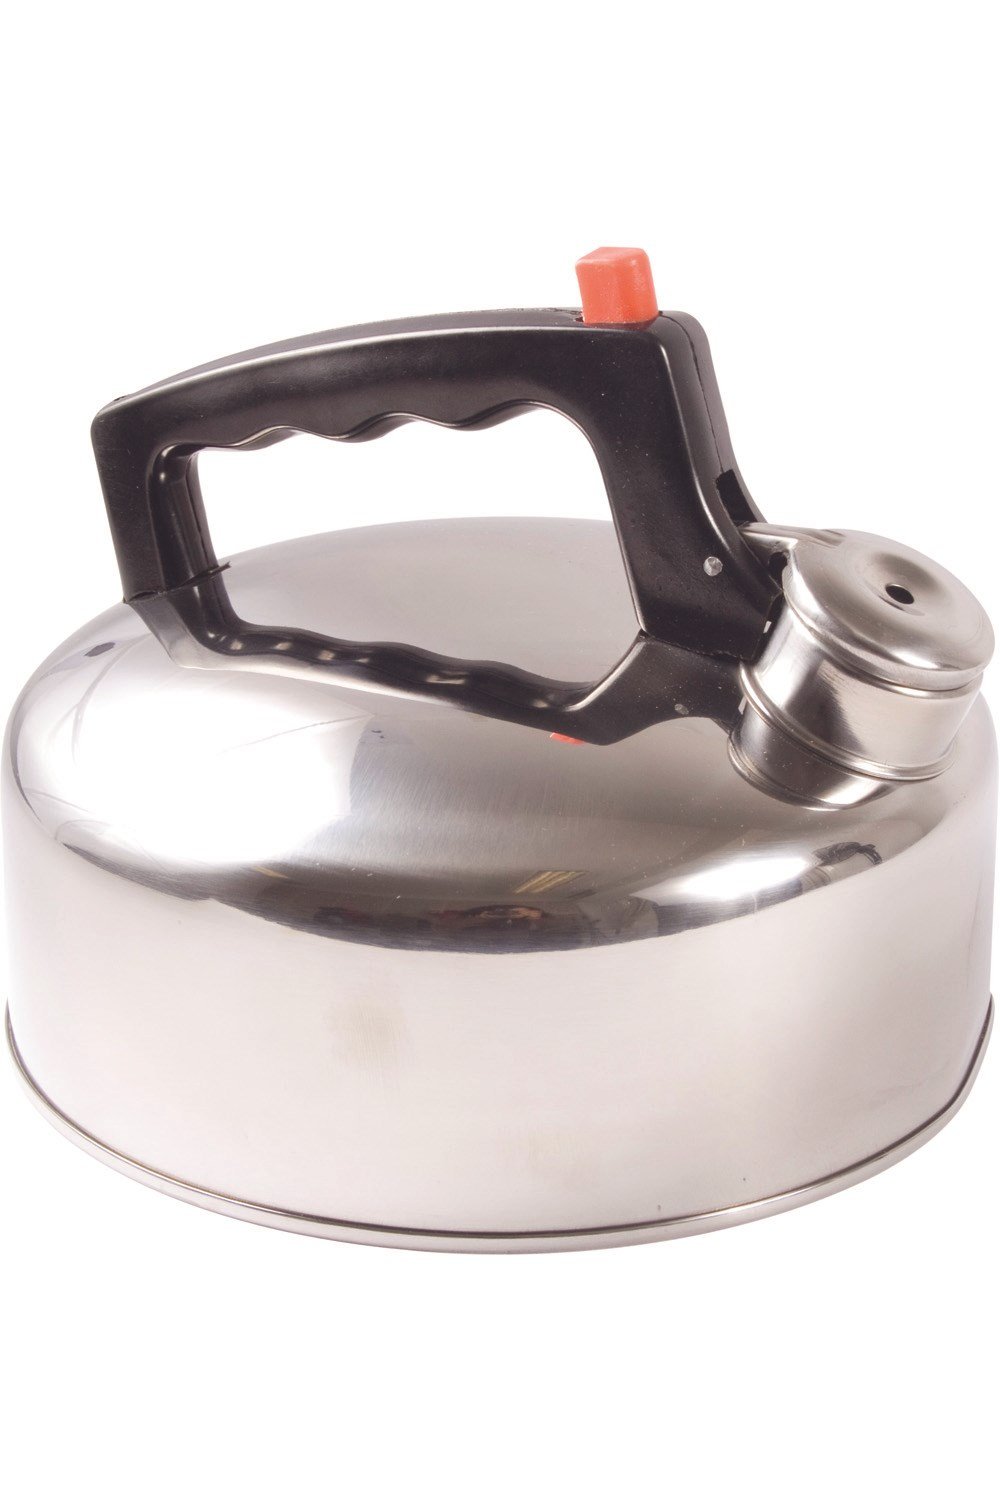 Mountain Warehouse 2 Litre Camping Kettle Silver